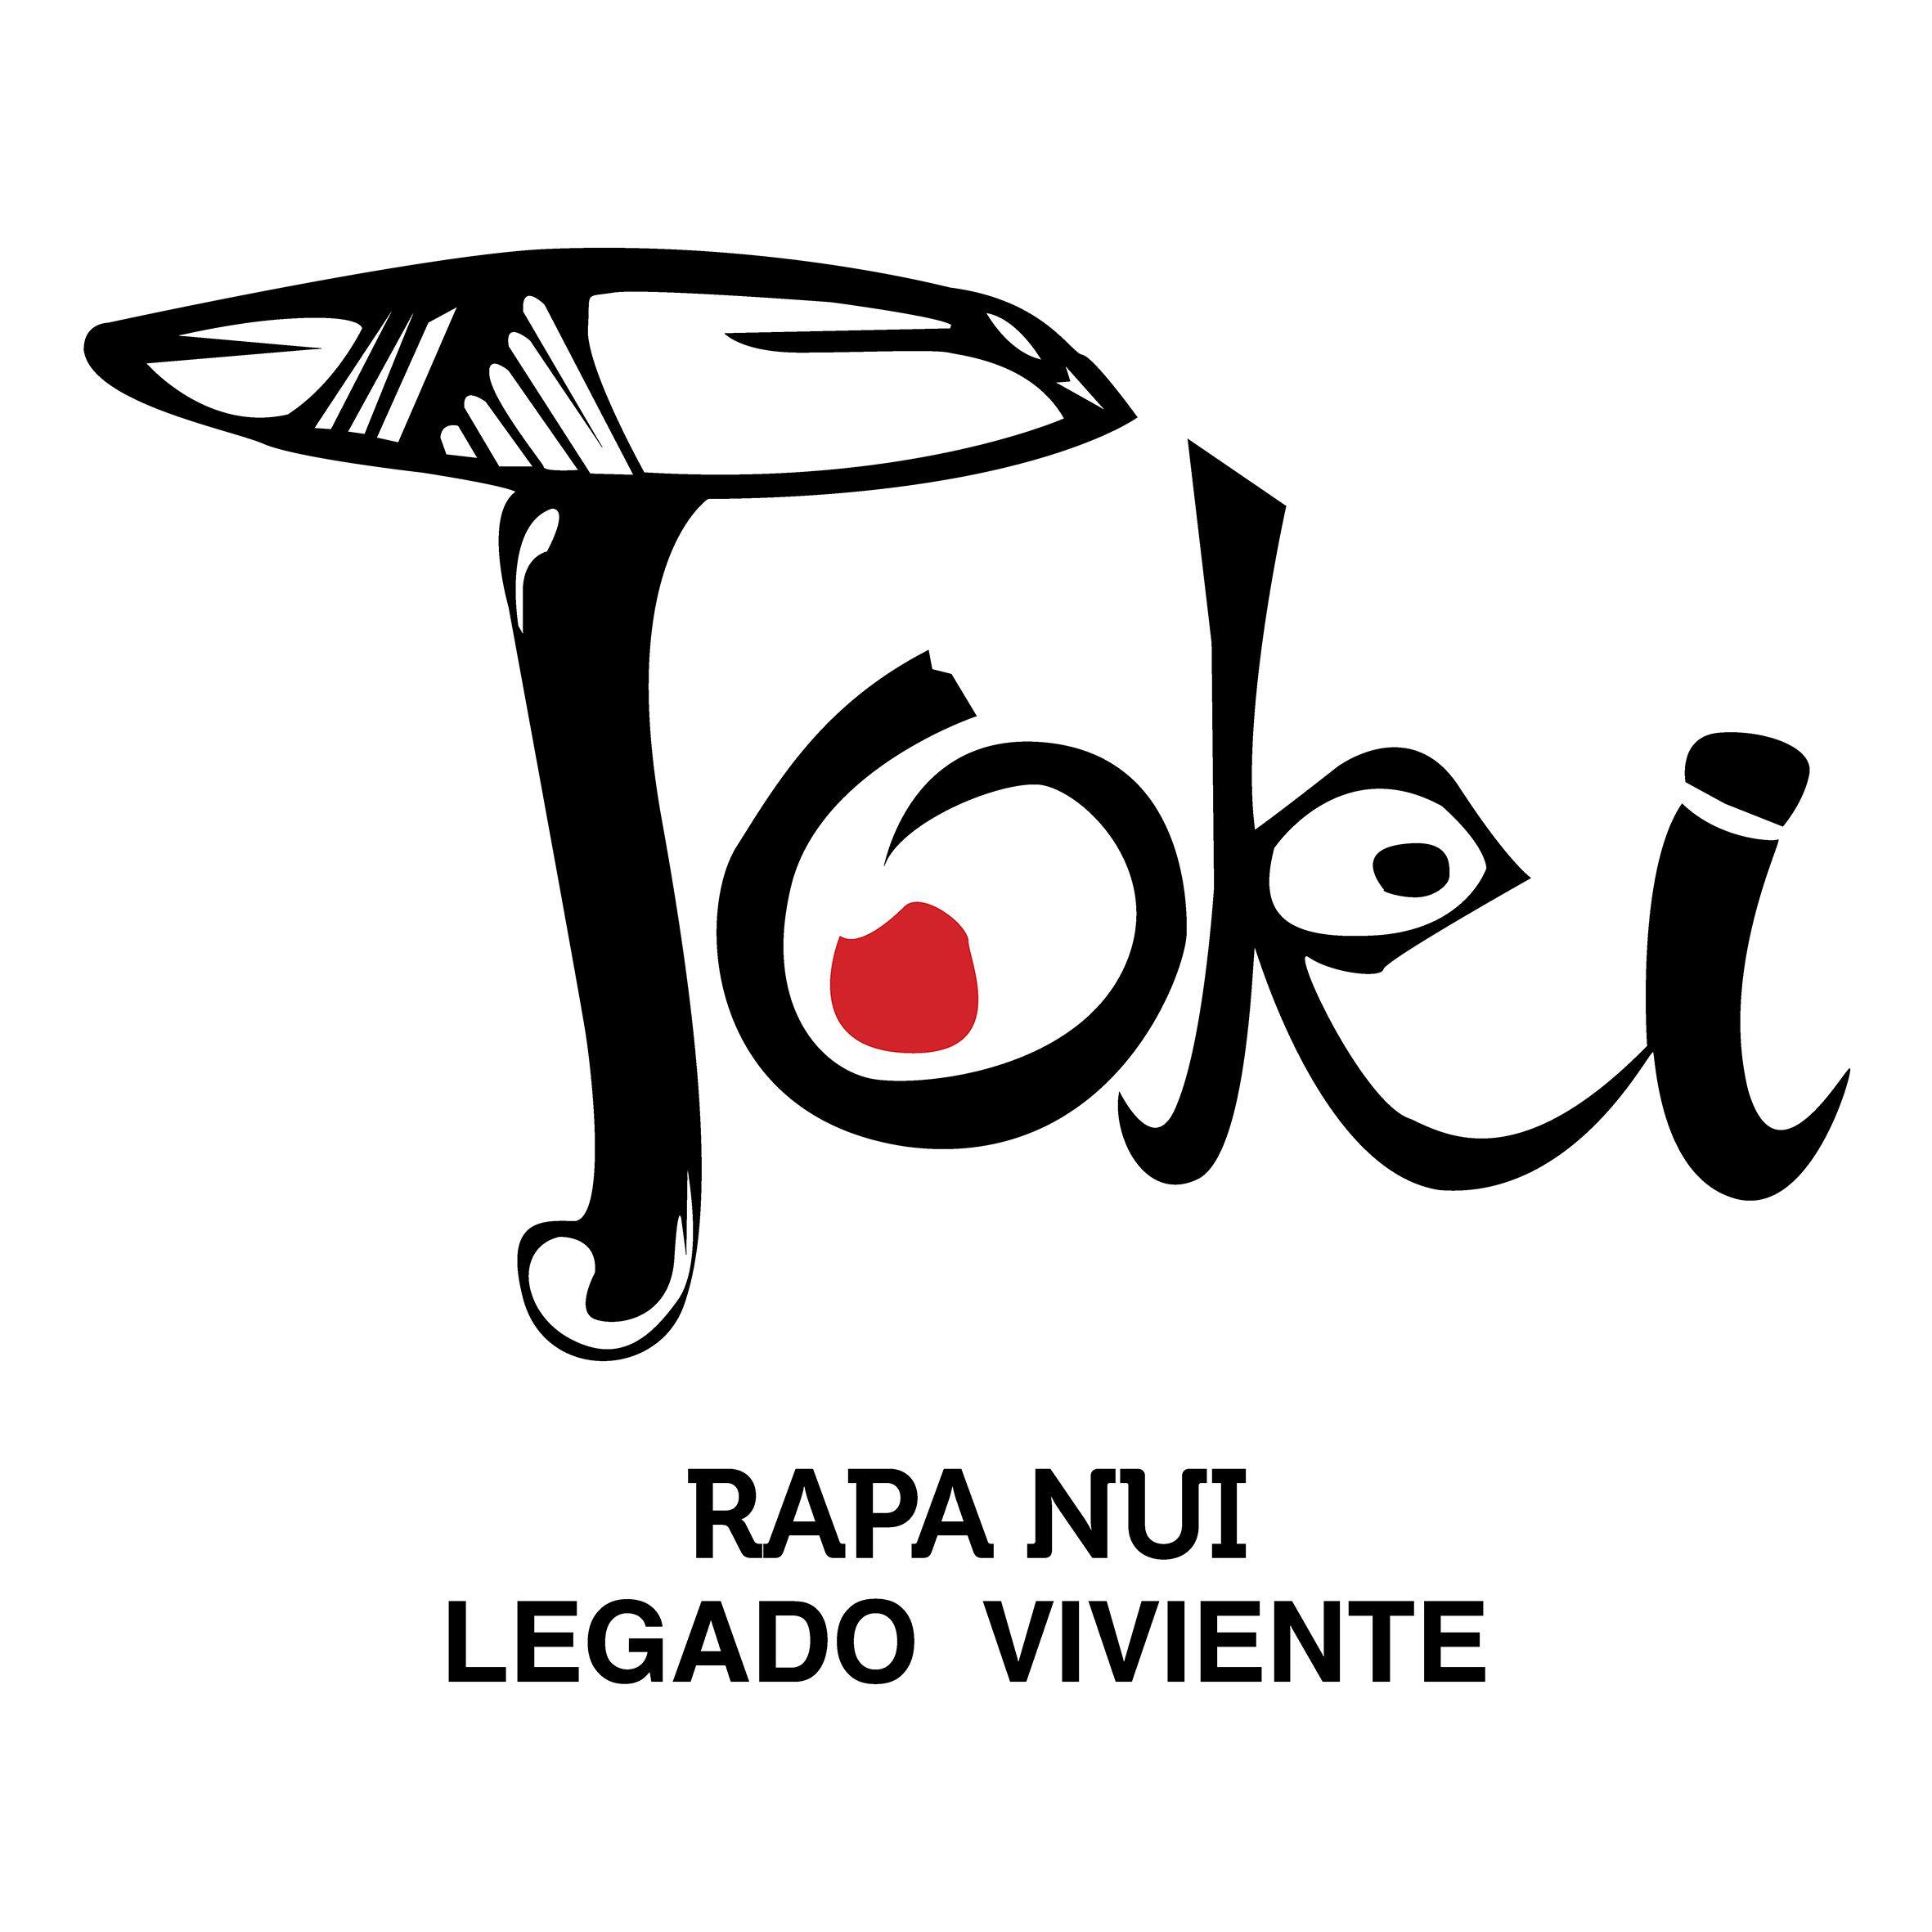 Toki Logo - Tailor Made Holidays And Travel Experiences In Chile And South America